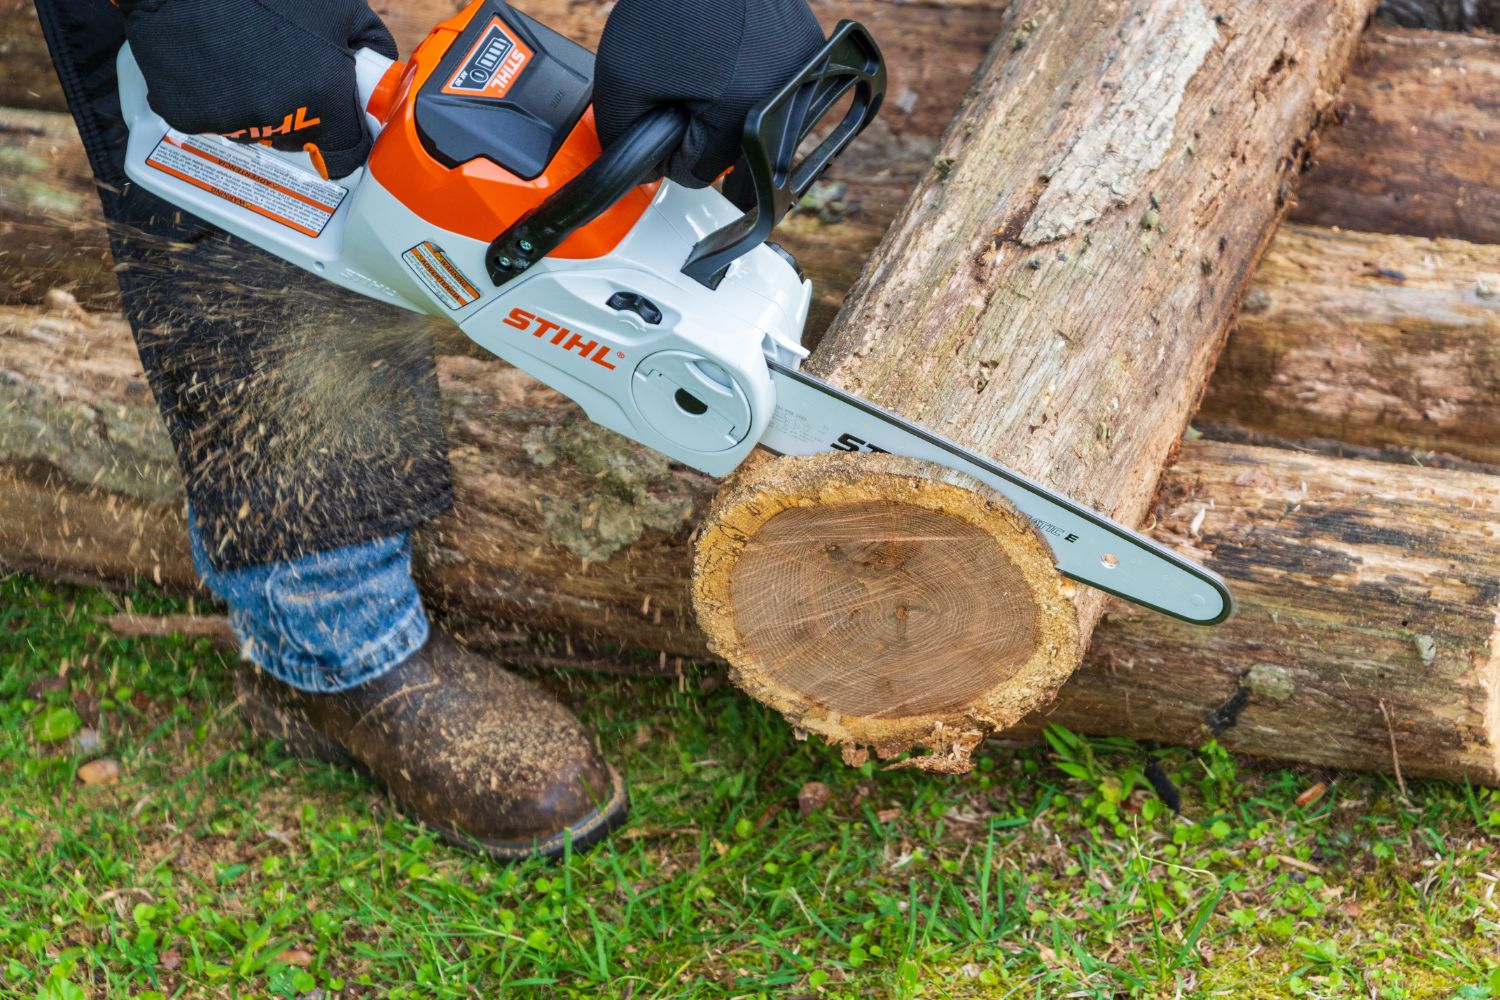 A person using the Stihl MSA electric chainsaw to saw the end off a log